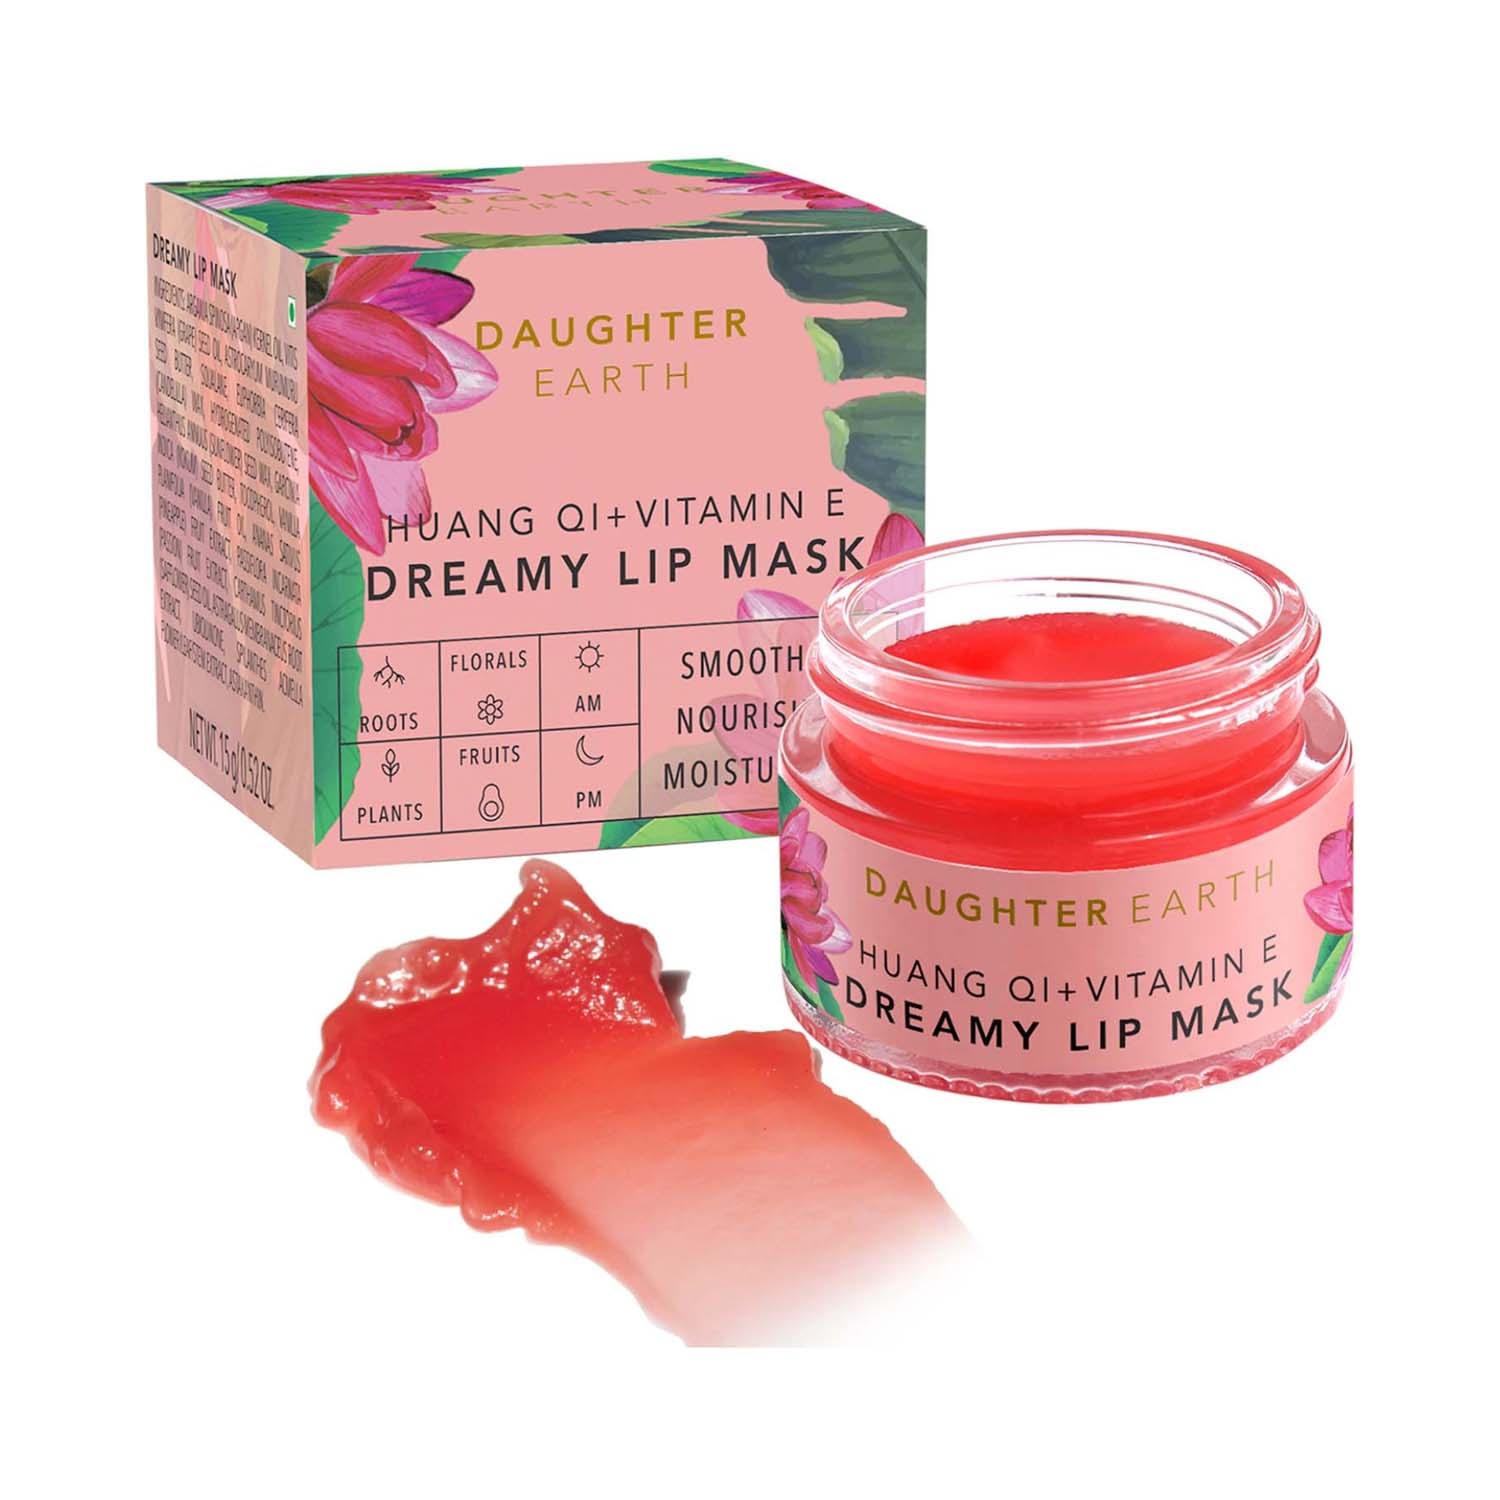 DAUGHTER EARTH | DAUGHTER EARTH Dreamy Lip Mask With Vitamin E & Huang Qi (15g)